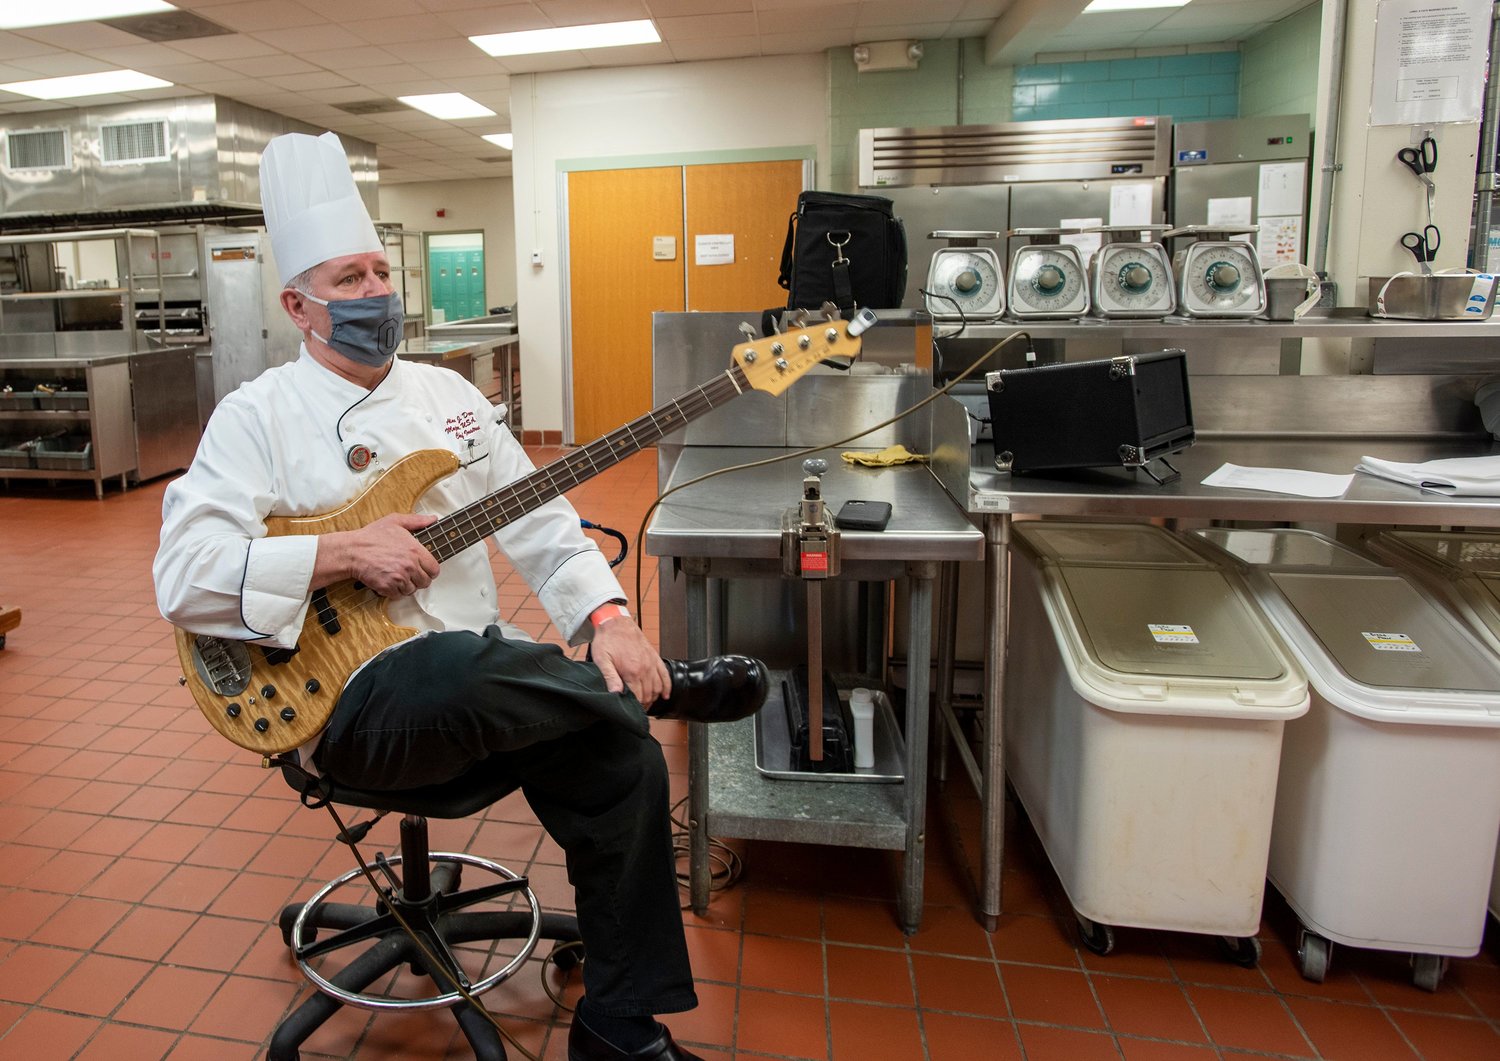 Alan Dover's bass guitar comes in handy in his culinary arts classroom at Fayetteville Technical Community College.